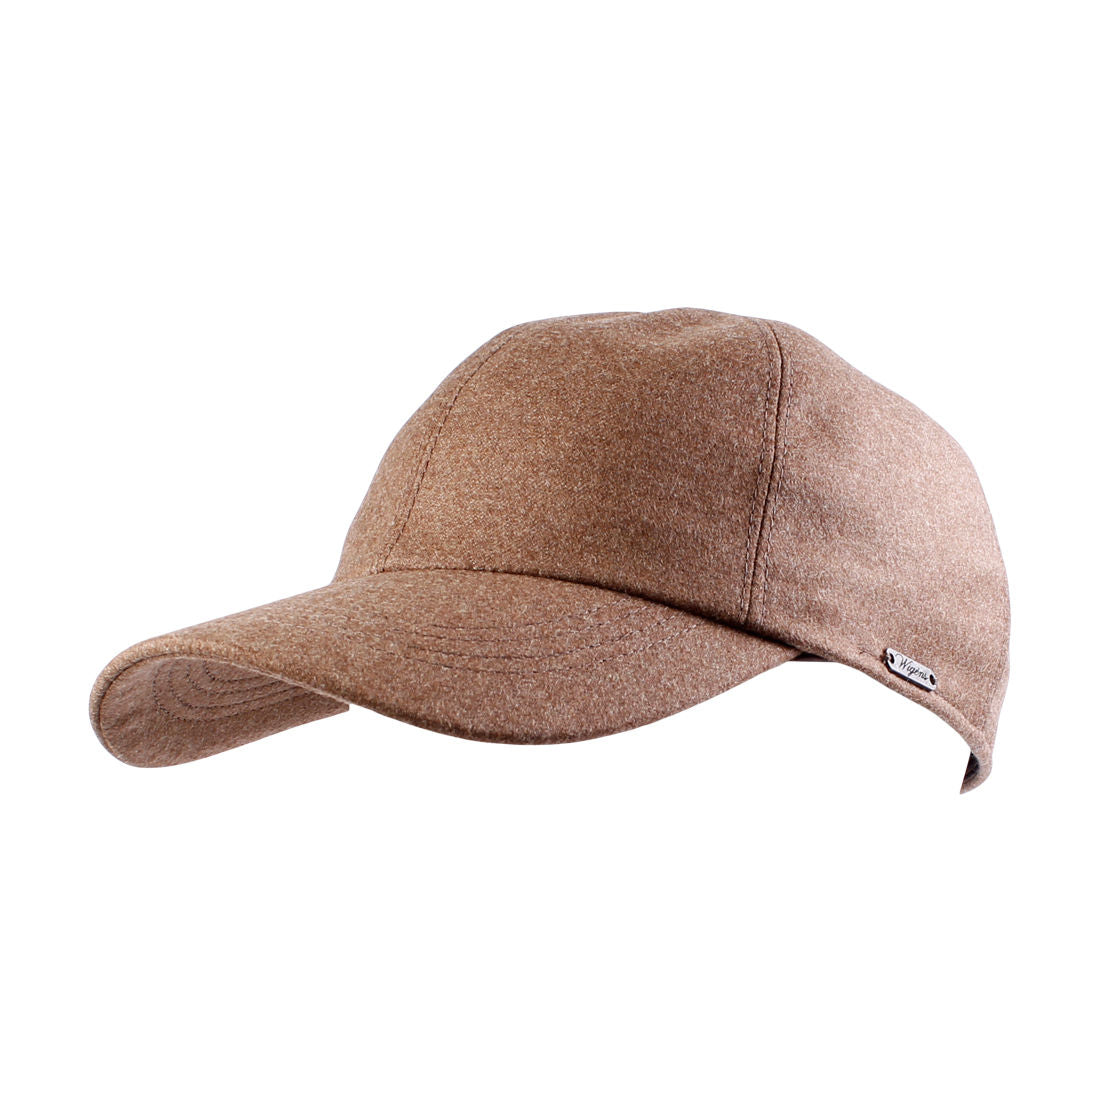 Loro Piana 'Storm System' Wool and Cashmere Flannel Baseball Classic Cap with Earflaps (Choice of Colors) by Wigens